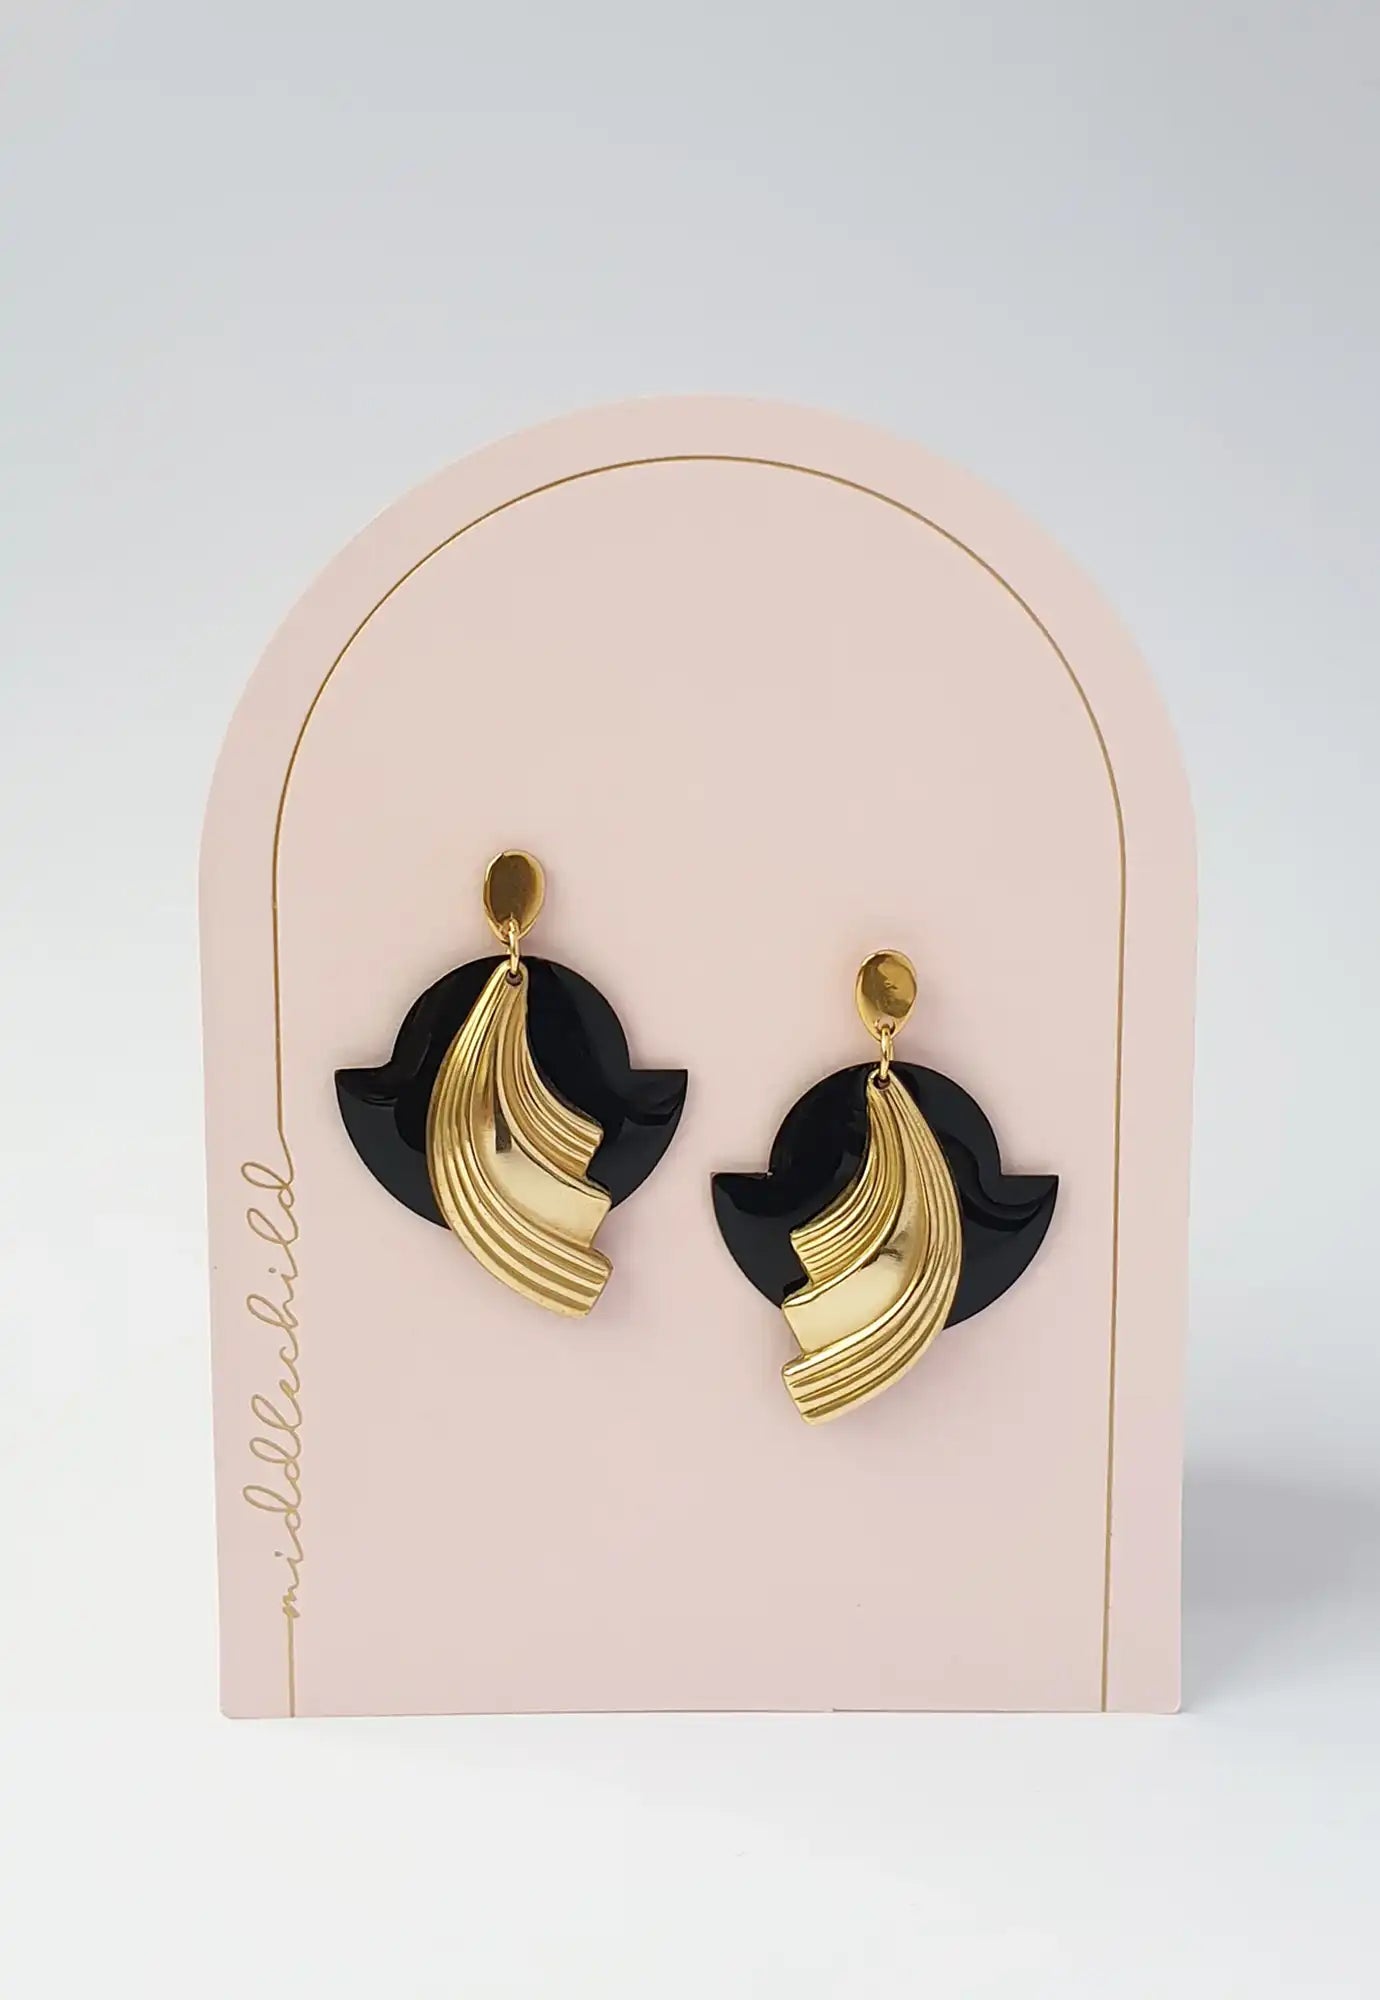 middle child - nuance earrings